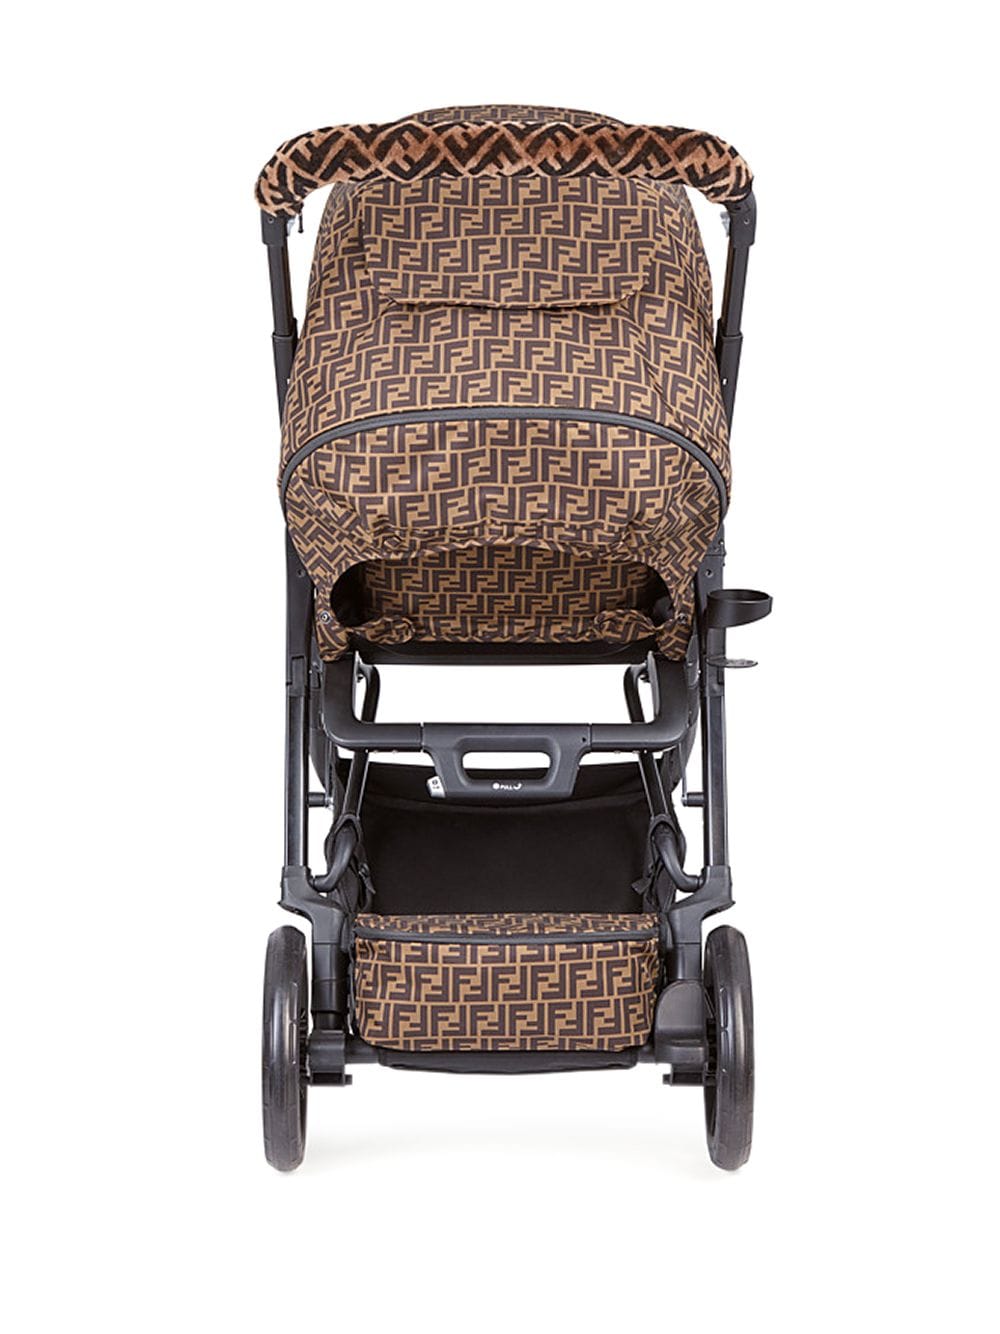 Brown and black baby stroller with logo